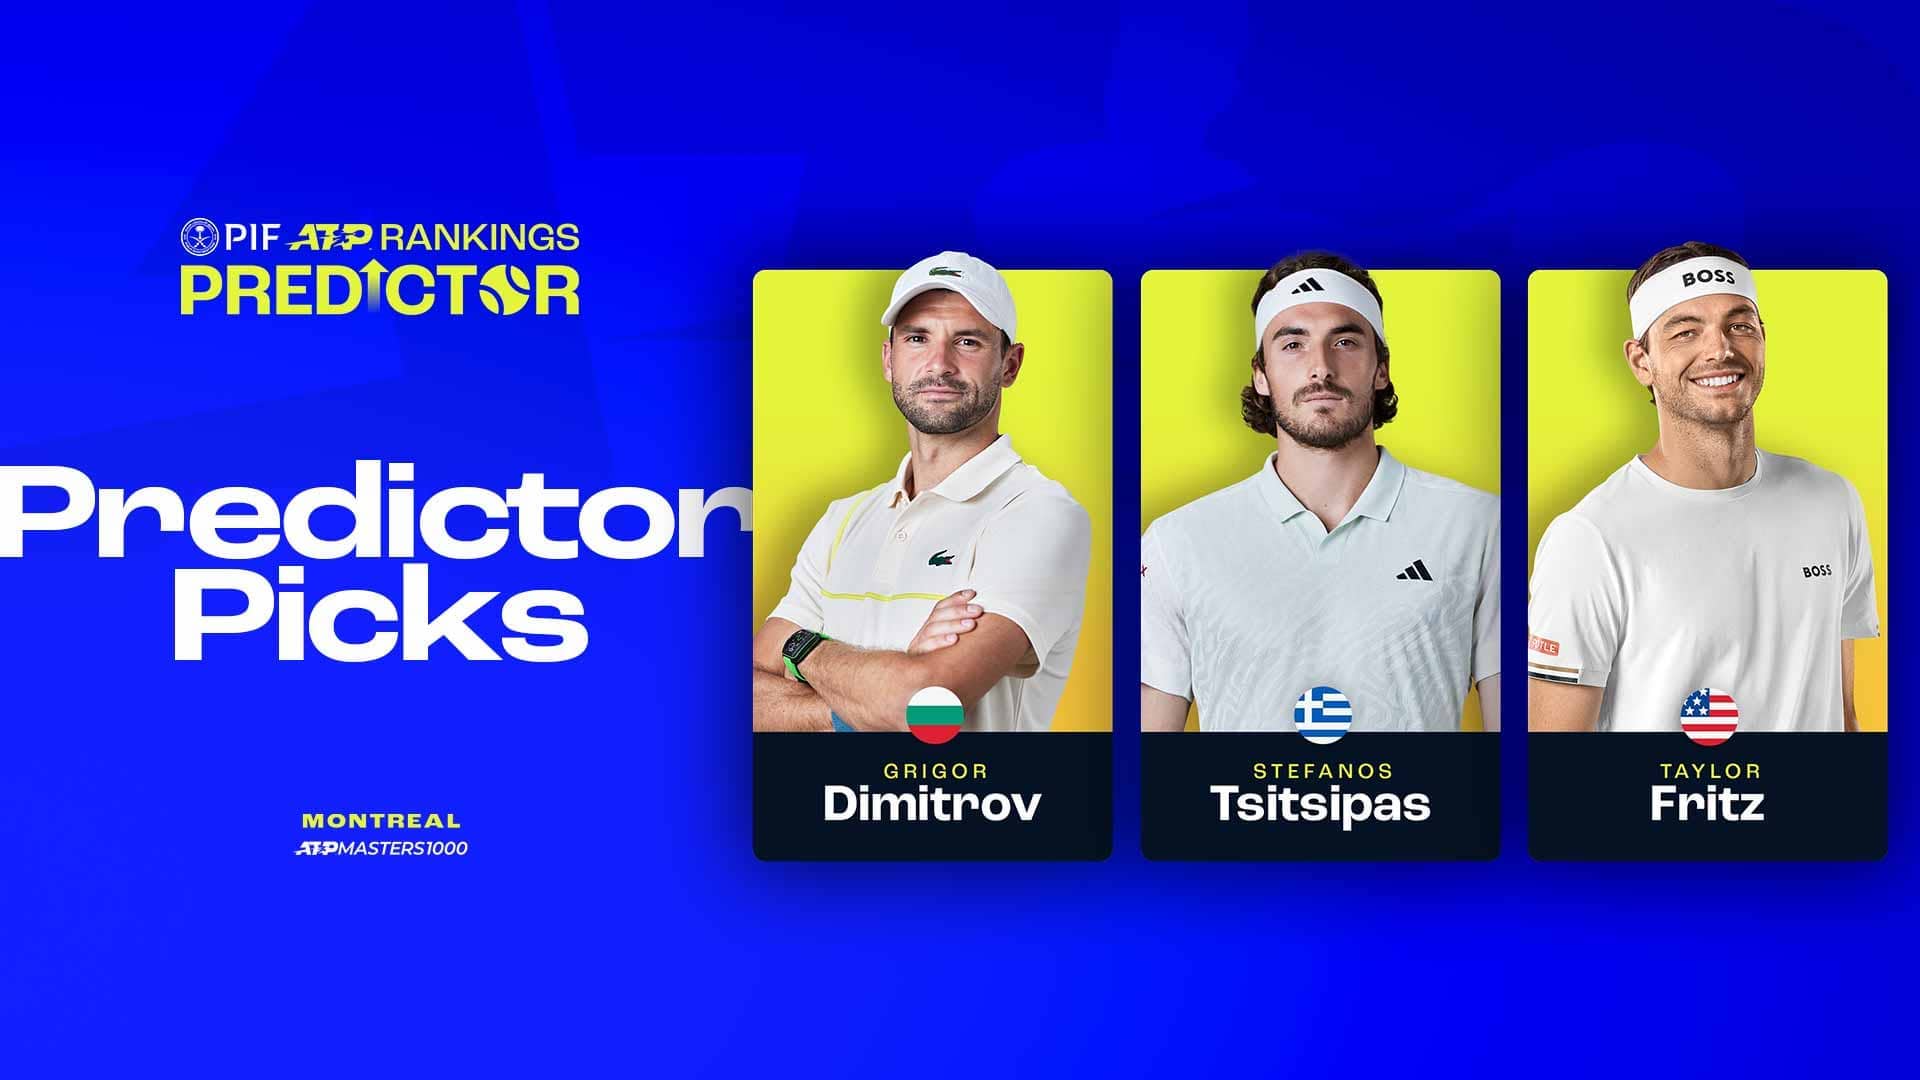 Grigor Dimitrov, Stefanos Tsitsipas and Taylor Fritz are competing this week in Montreal.